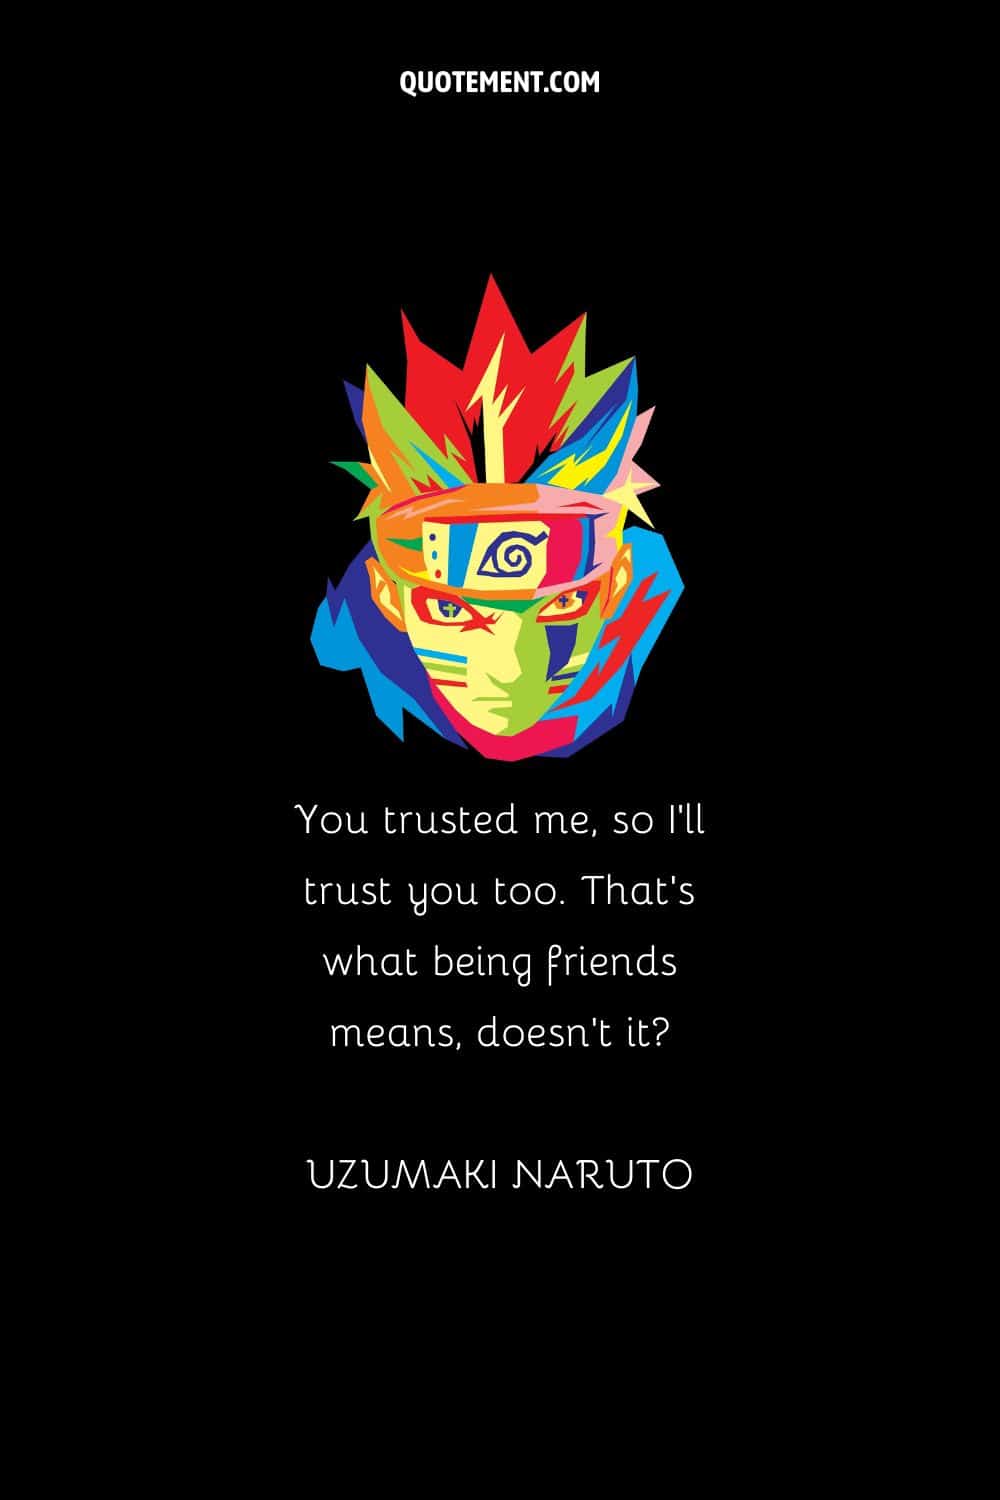 “You trusted me, so I’ll trust you too. That’s what being friends means, doesn’t it” — Uzumaki Naruto